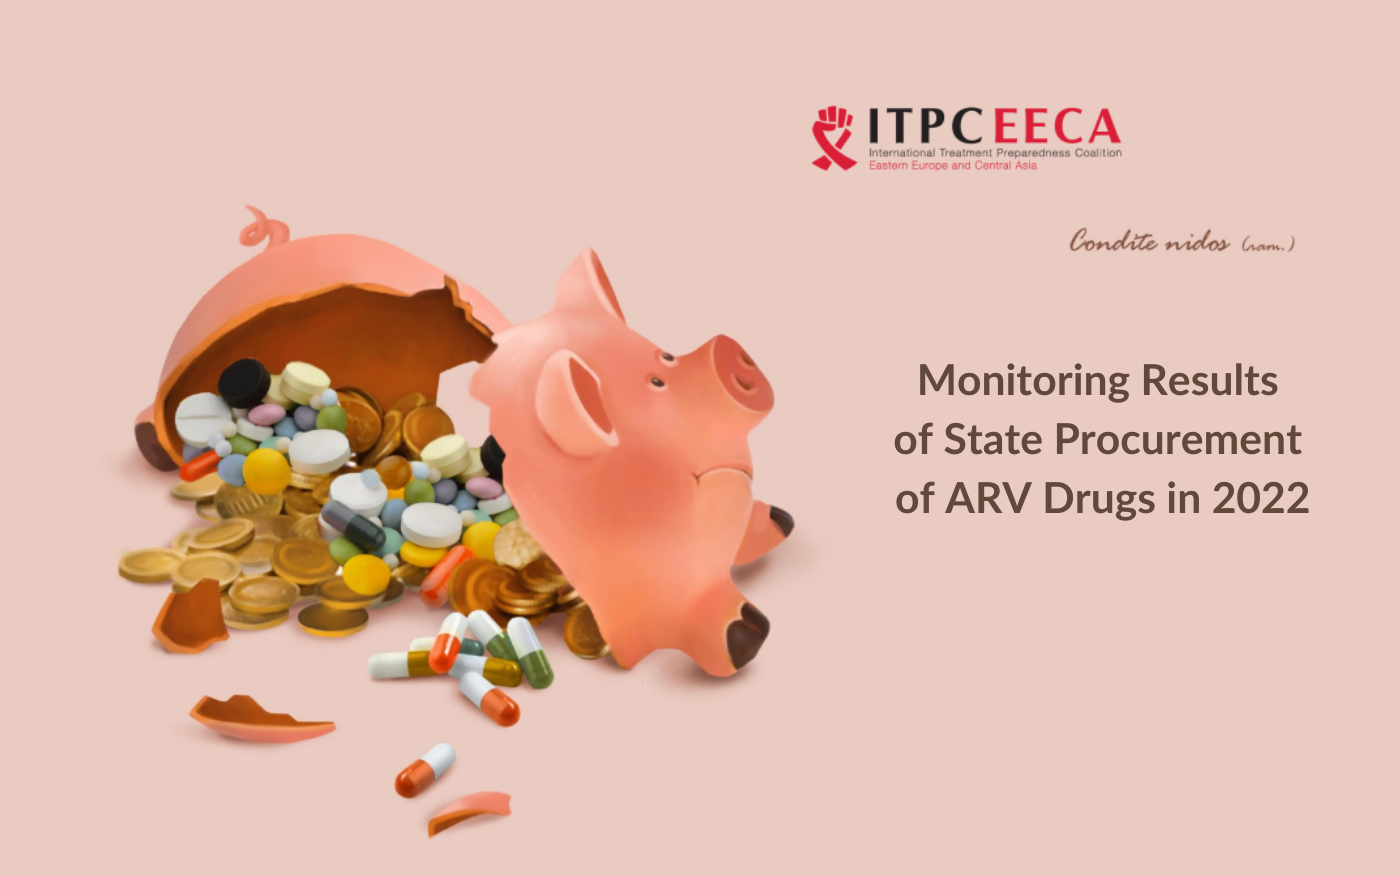 Monitoring Results of State Procurement of ARV Drugs in 2022